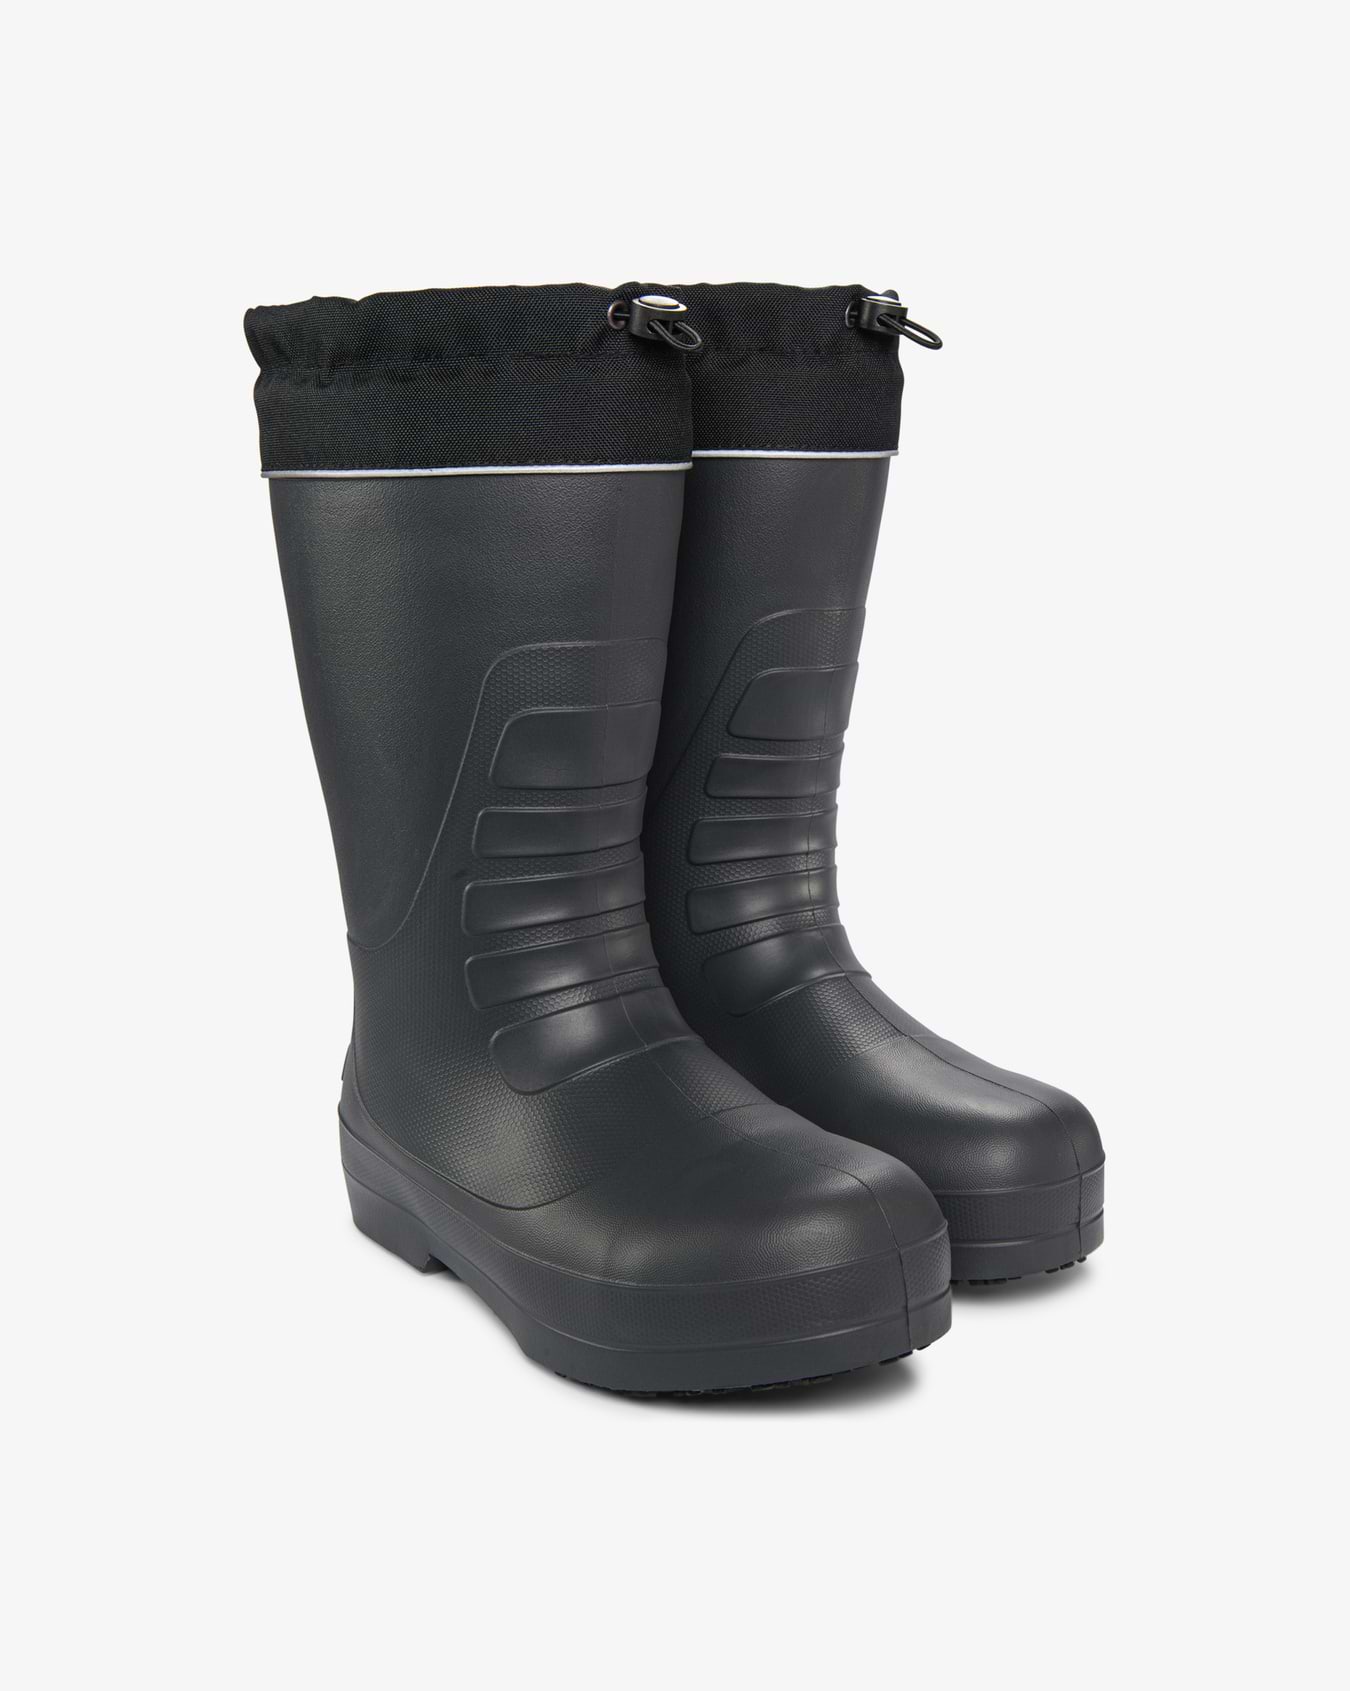 Norse Black/Charcoal Tall Boot